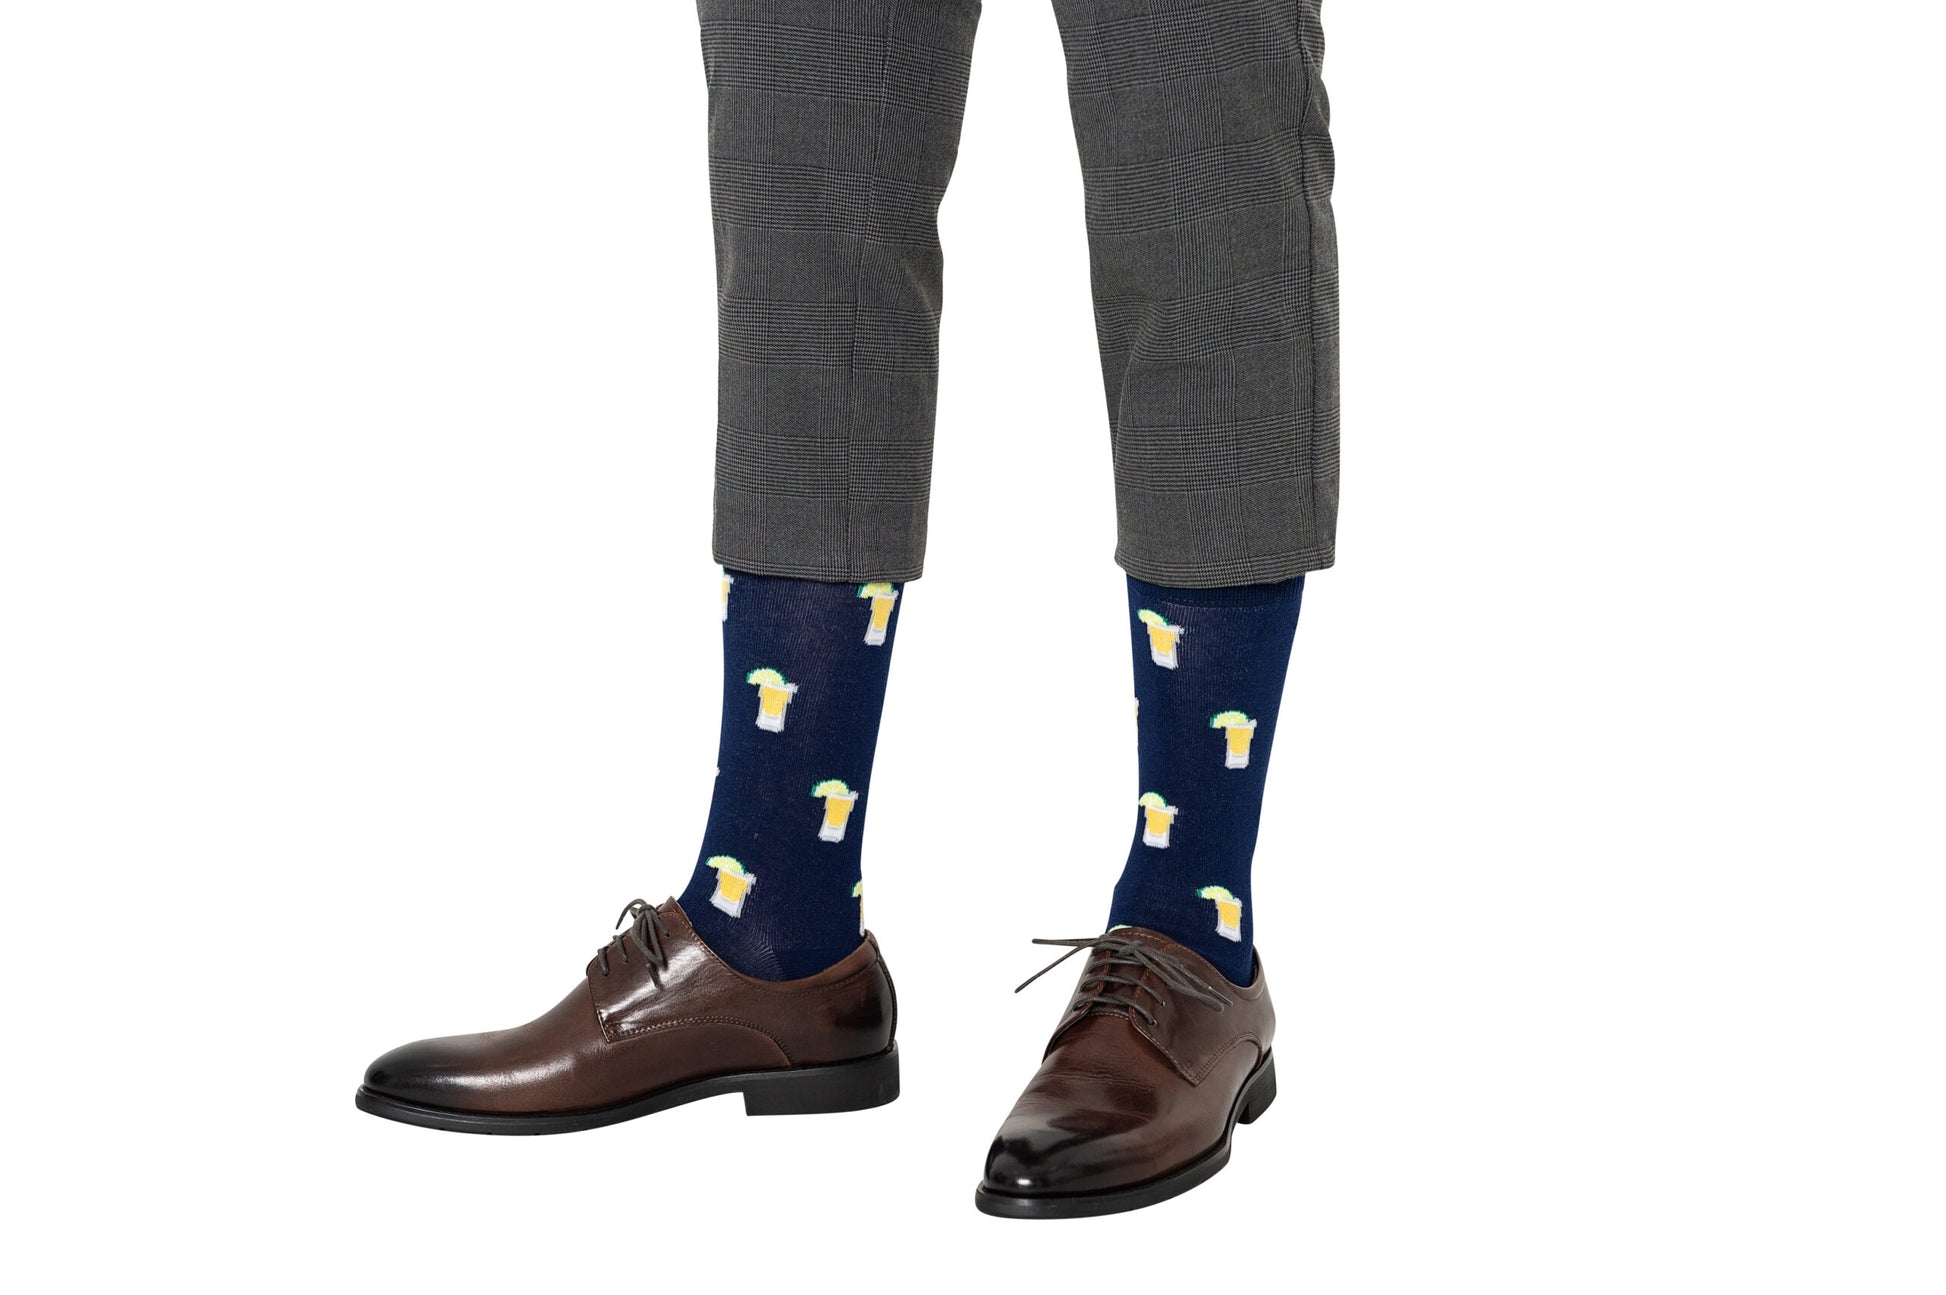 A person standing in brown leather shoes and Tequila Socks with yellow and white patterns, wearing grey trousers, embodies a spirited style.